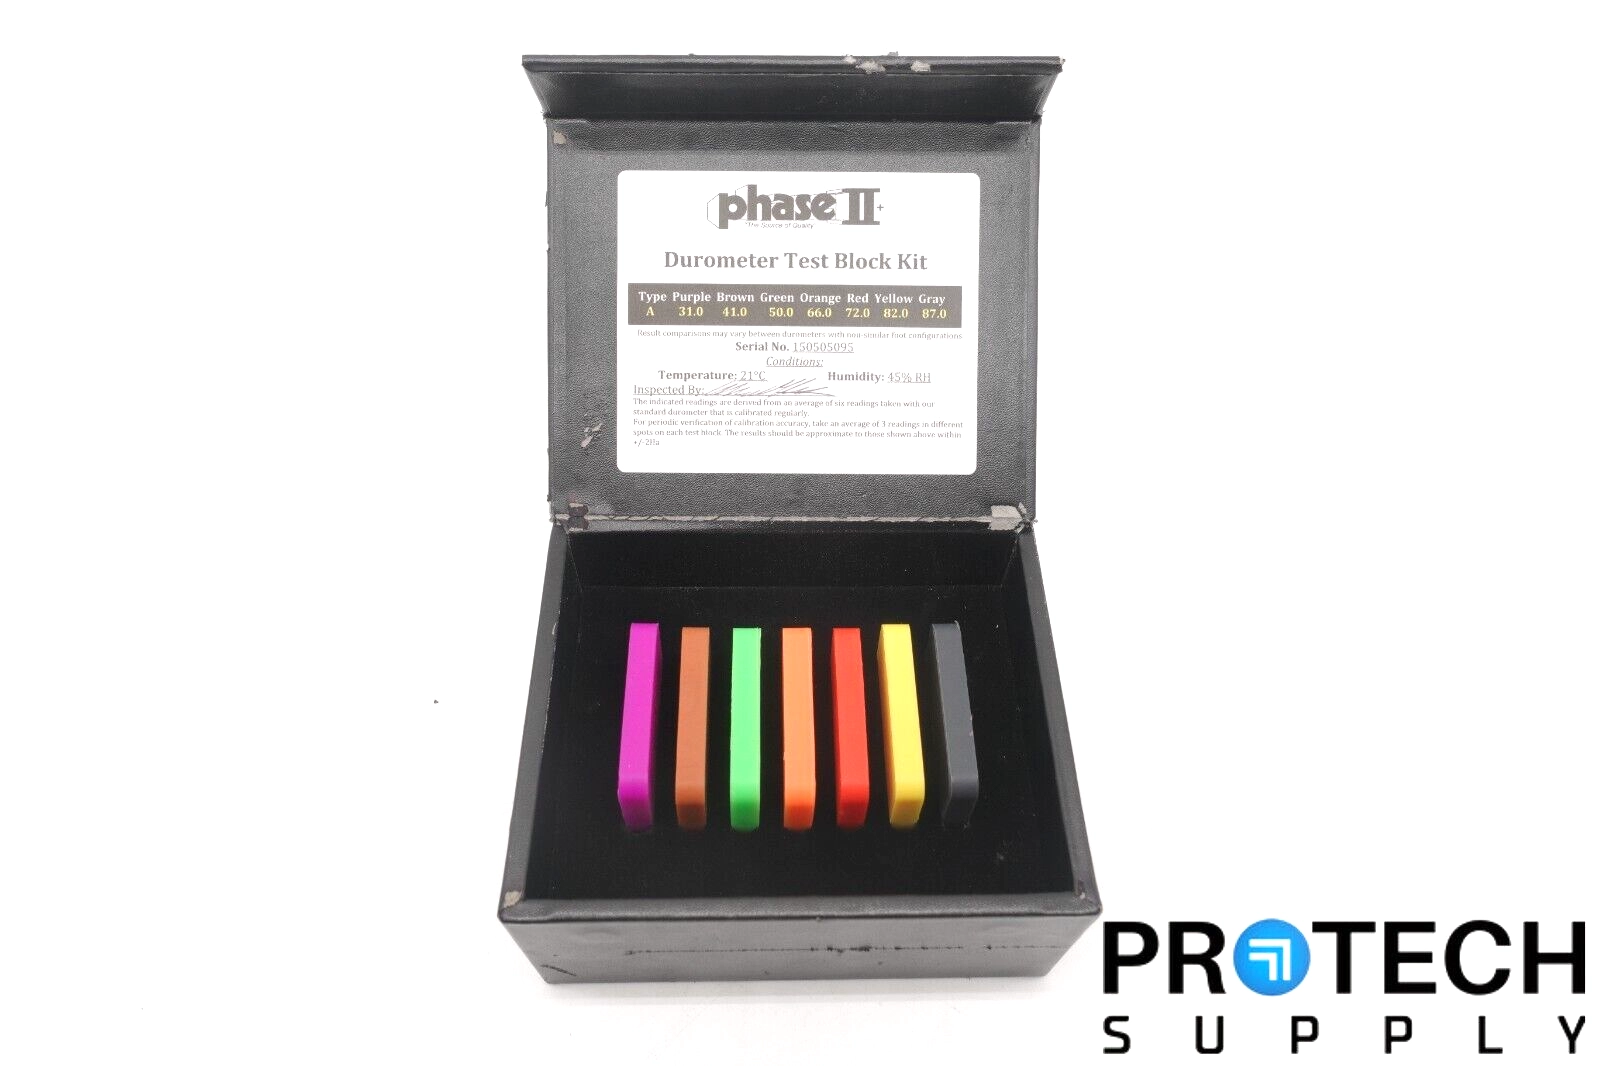 Phase II PHT950-25 7pc Durometer Shore "A" Test Bl